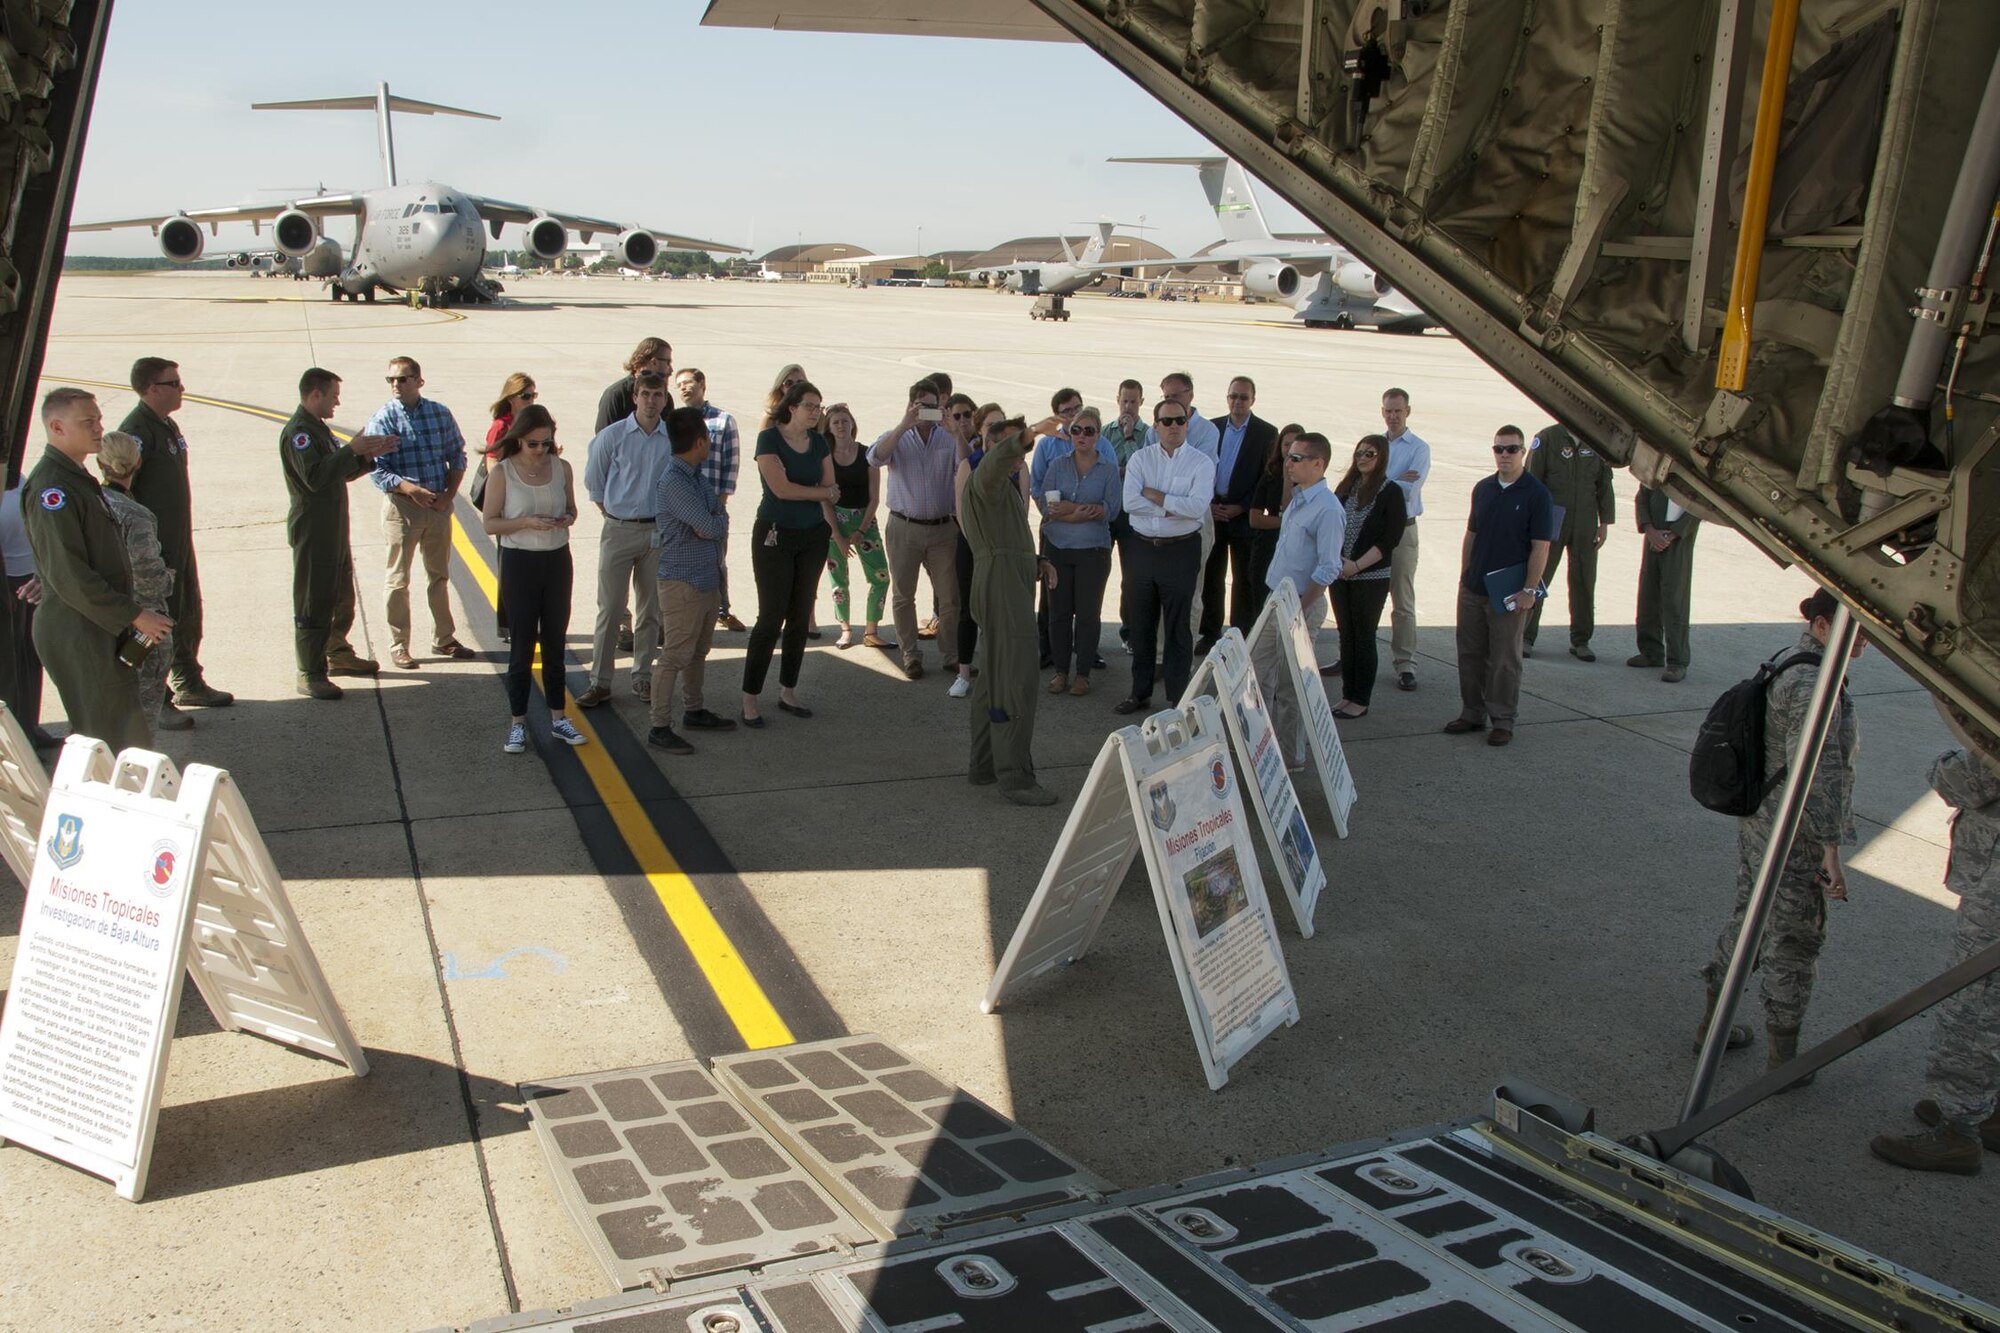 Major Brad Roundtree, 53d Weather Reconnaissance Squadron pilot, discusses his unit’s mission with congressional staff members on the Joint Base Andrews, Md., flight line June 28, 2016. In honor of the 100th anniversary of air reserve power, members of the 53d WRS visited Andrews to participate in a C-130 Hercules special-missions demonstration. The 53d WRS is the only flying weather reconnaissance unit in the world flying routine missions to survey tropical and winter storms. (U.S. Air Force photo/Staff Sgt. Kat Justen)